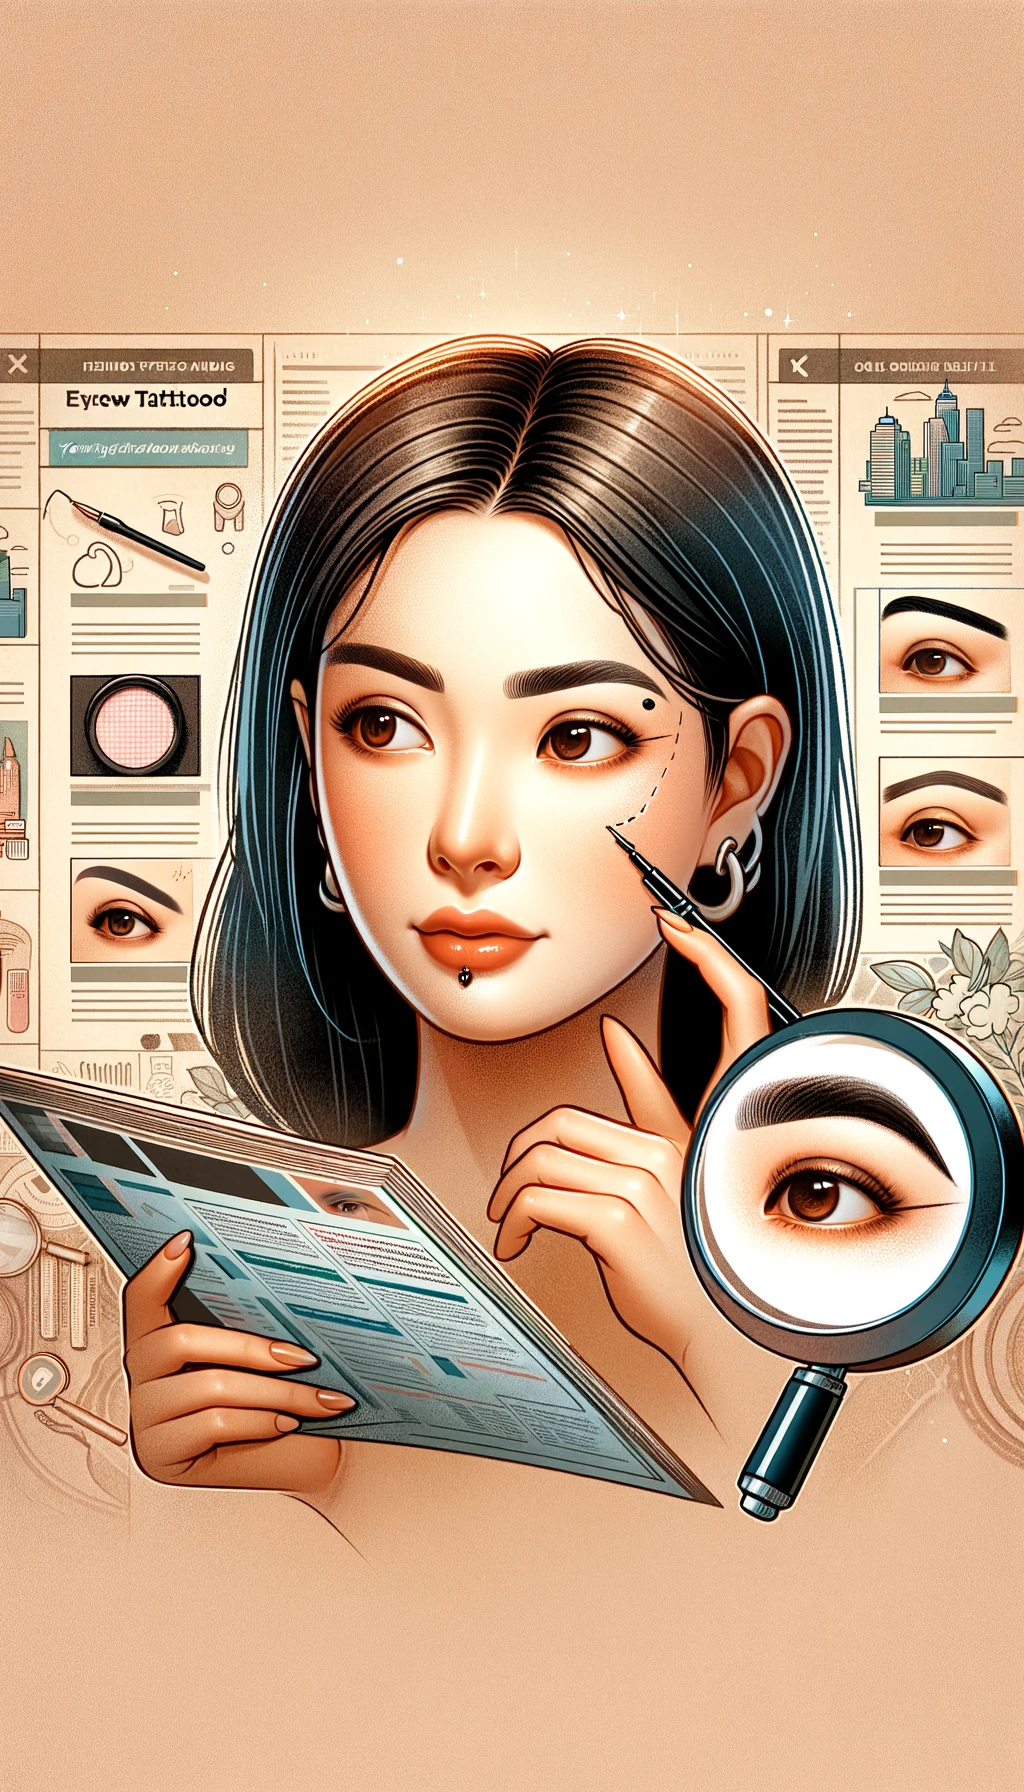 A detailed portrait representing Your Guide to Eyebrow Tattooing Finding the Perfect Service Near You. The image features a woman Asian descent l